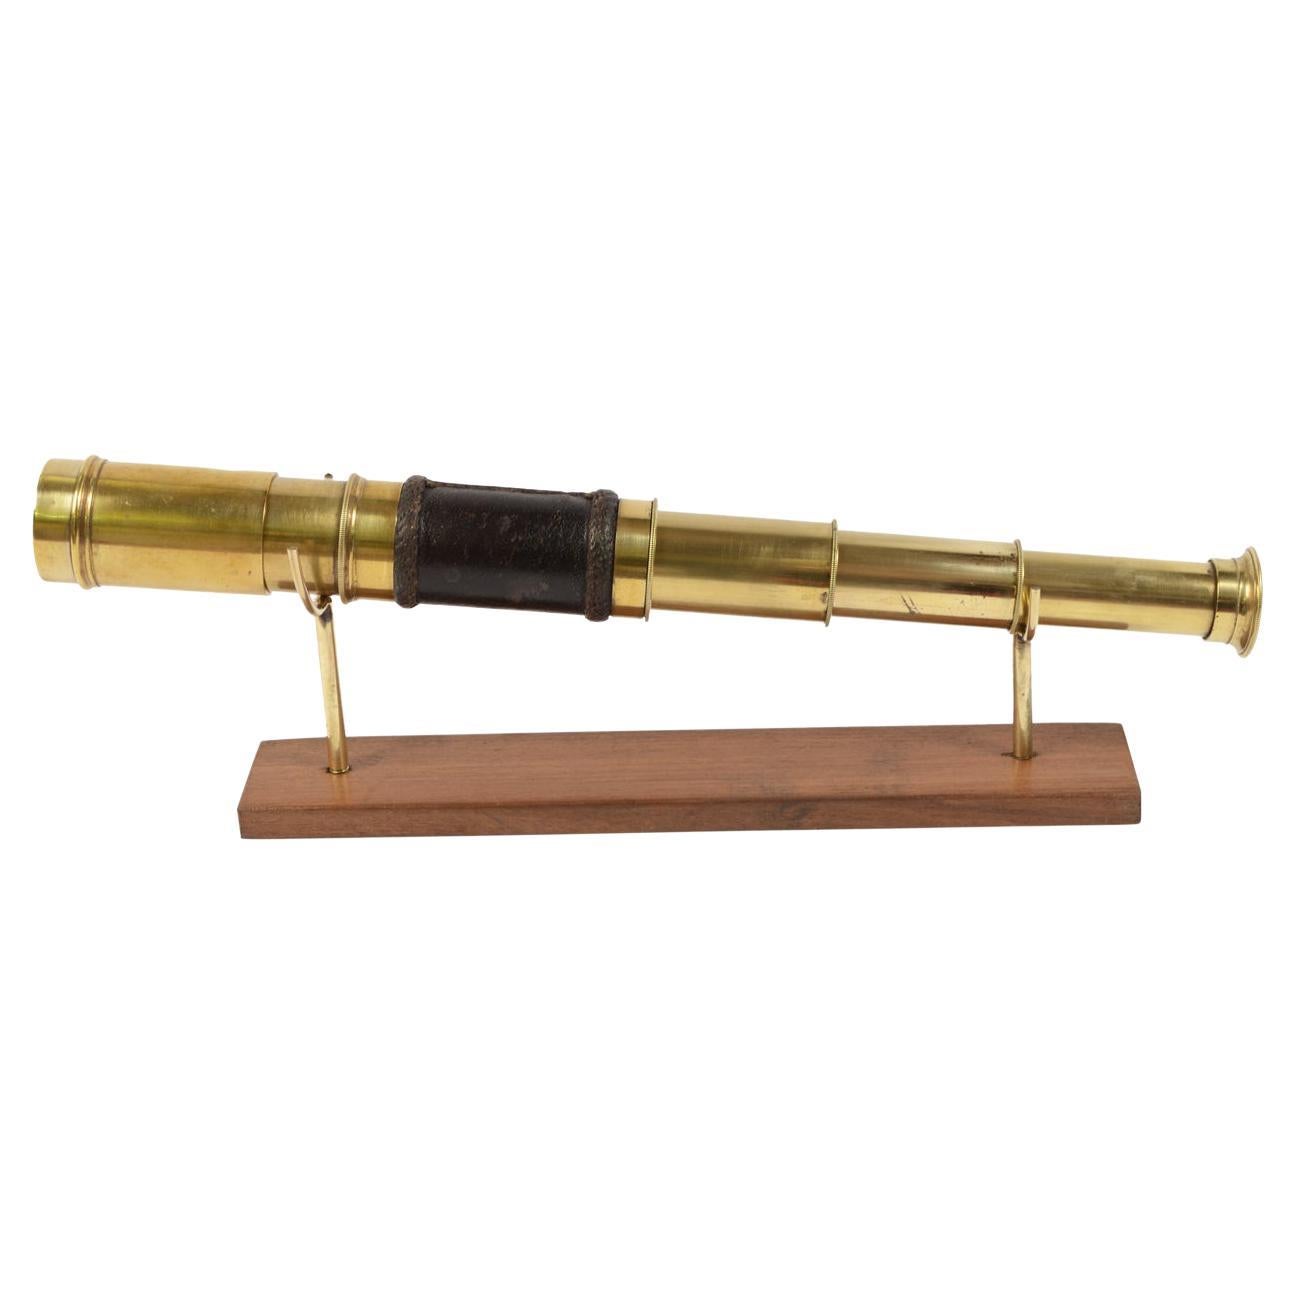 Antique Nautical Telescope, Brass and Leather, Mid-19th Century